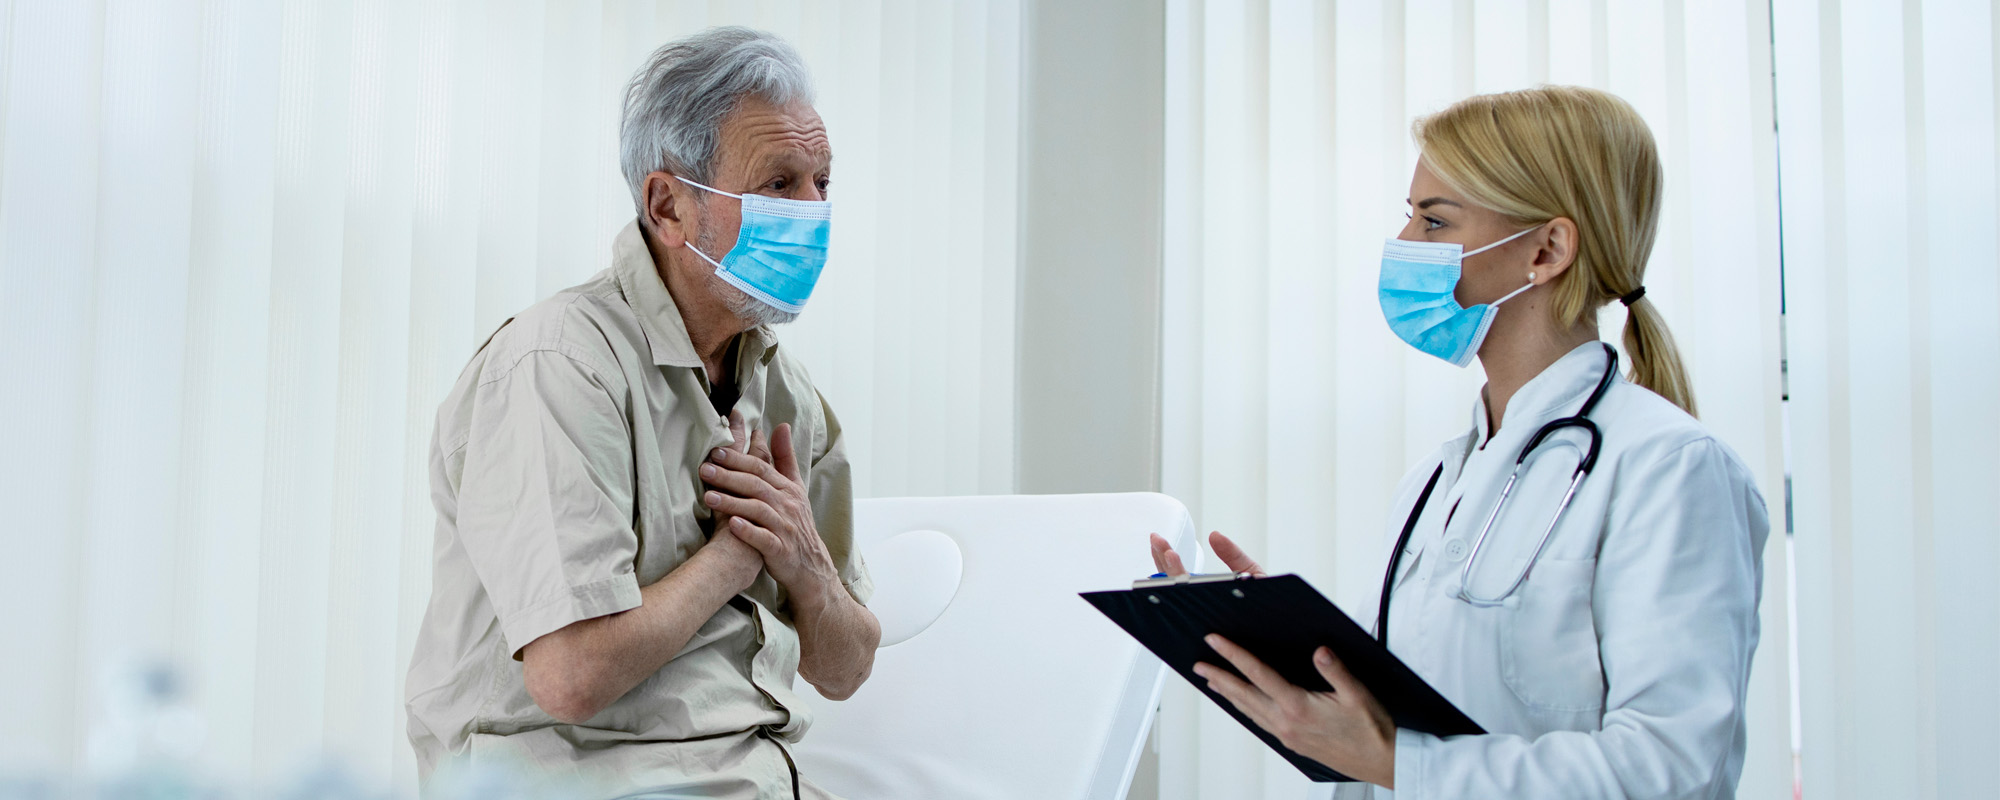 elderly man complaining on chestpains while doctor writing down symptoms